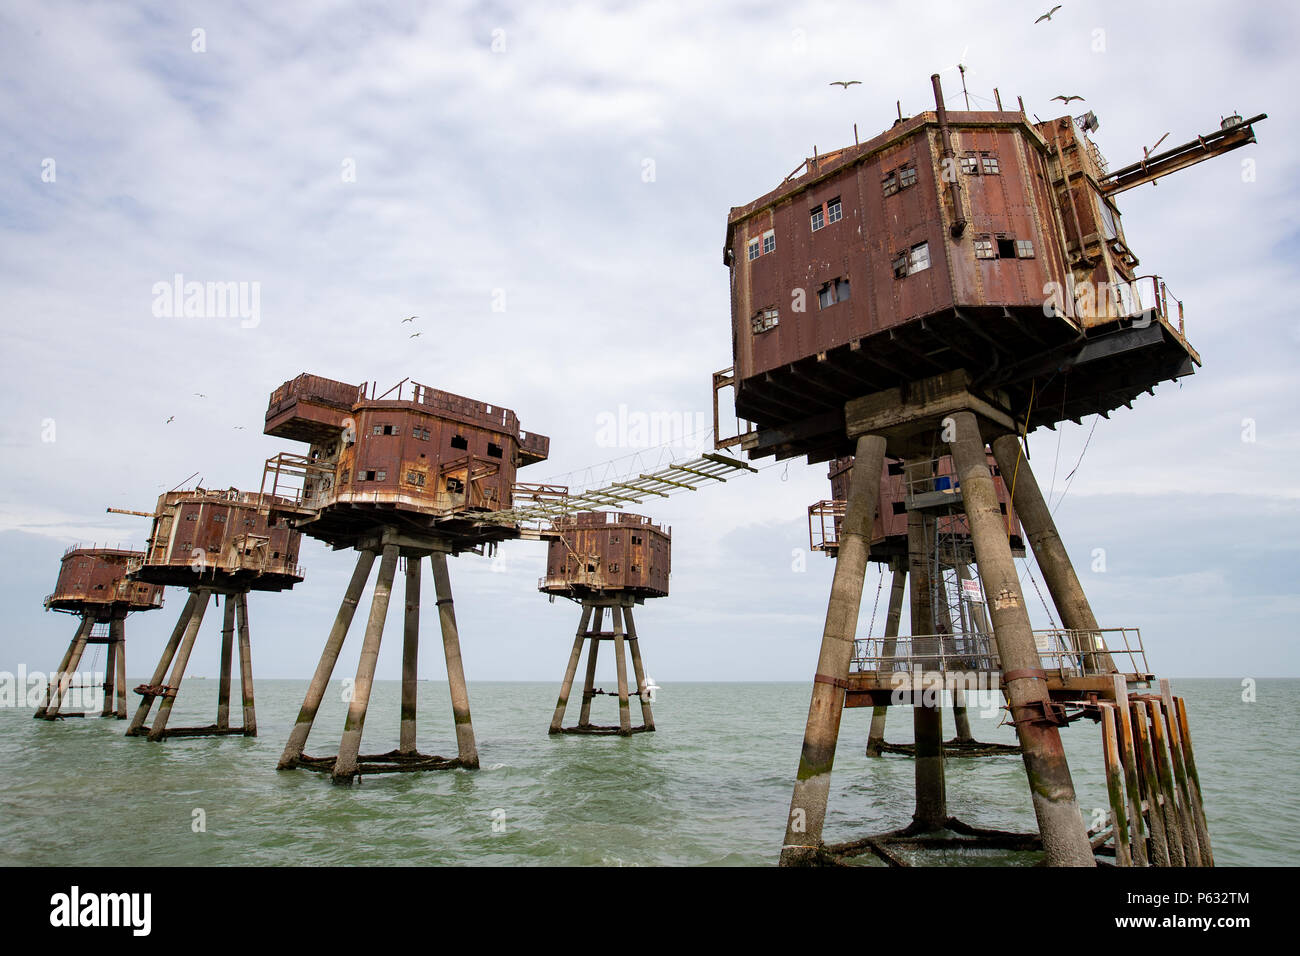 Maunsell Forts - Red Sands sea forts now abandoned Stock Photo - Alamy